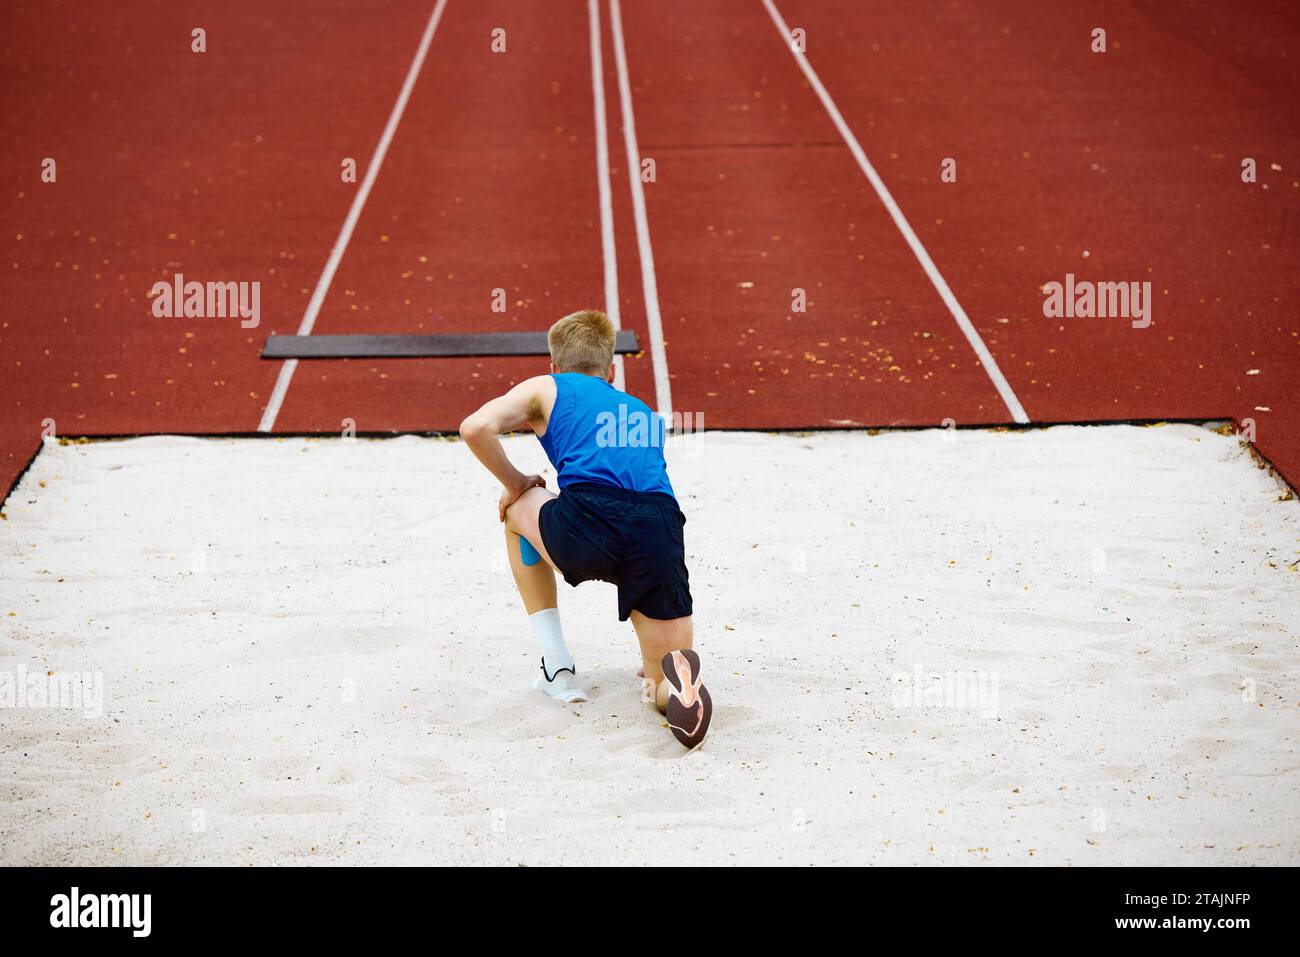 Rear view of young athletic man, professional sportsman wearing in sport uniform stands in sand pit. Intensity captured in mid-stride long jump. Stock Photo